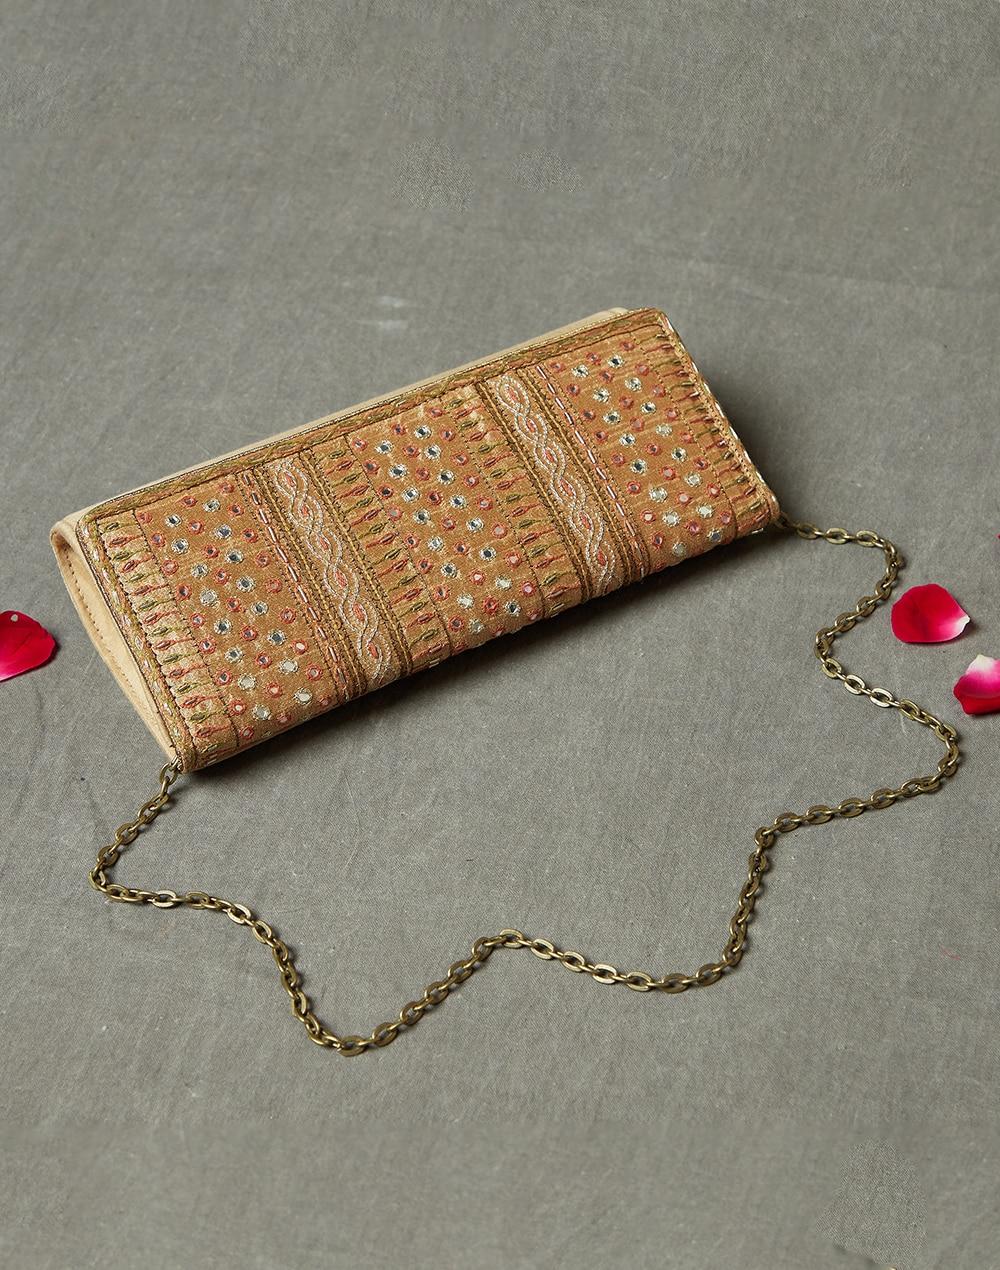 fabric embroidered clutch bag